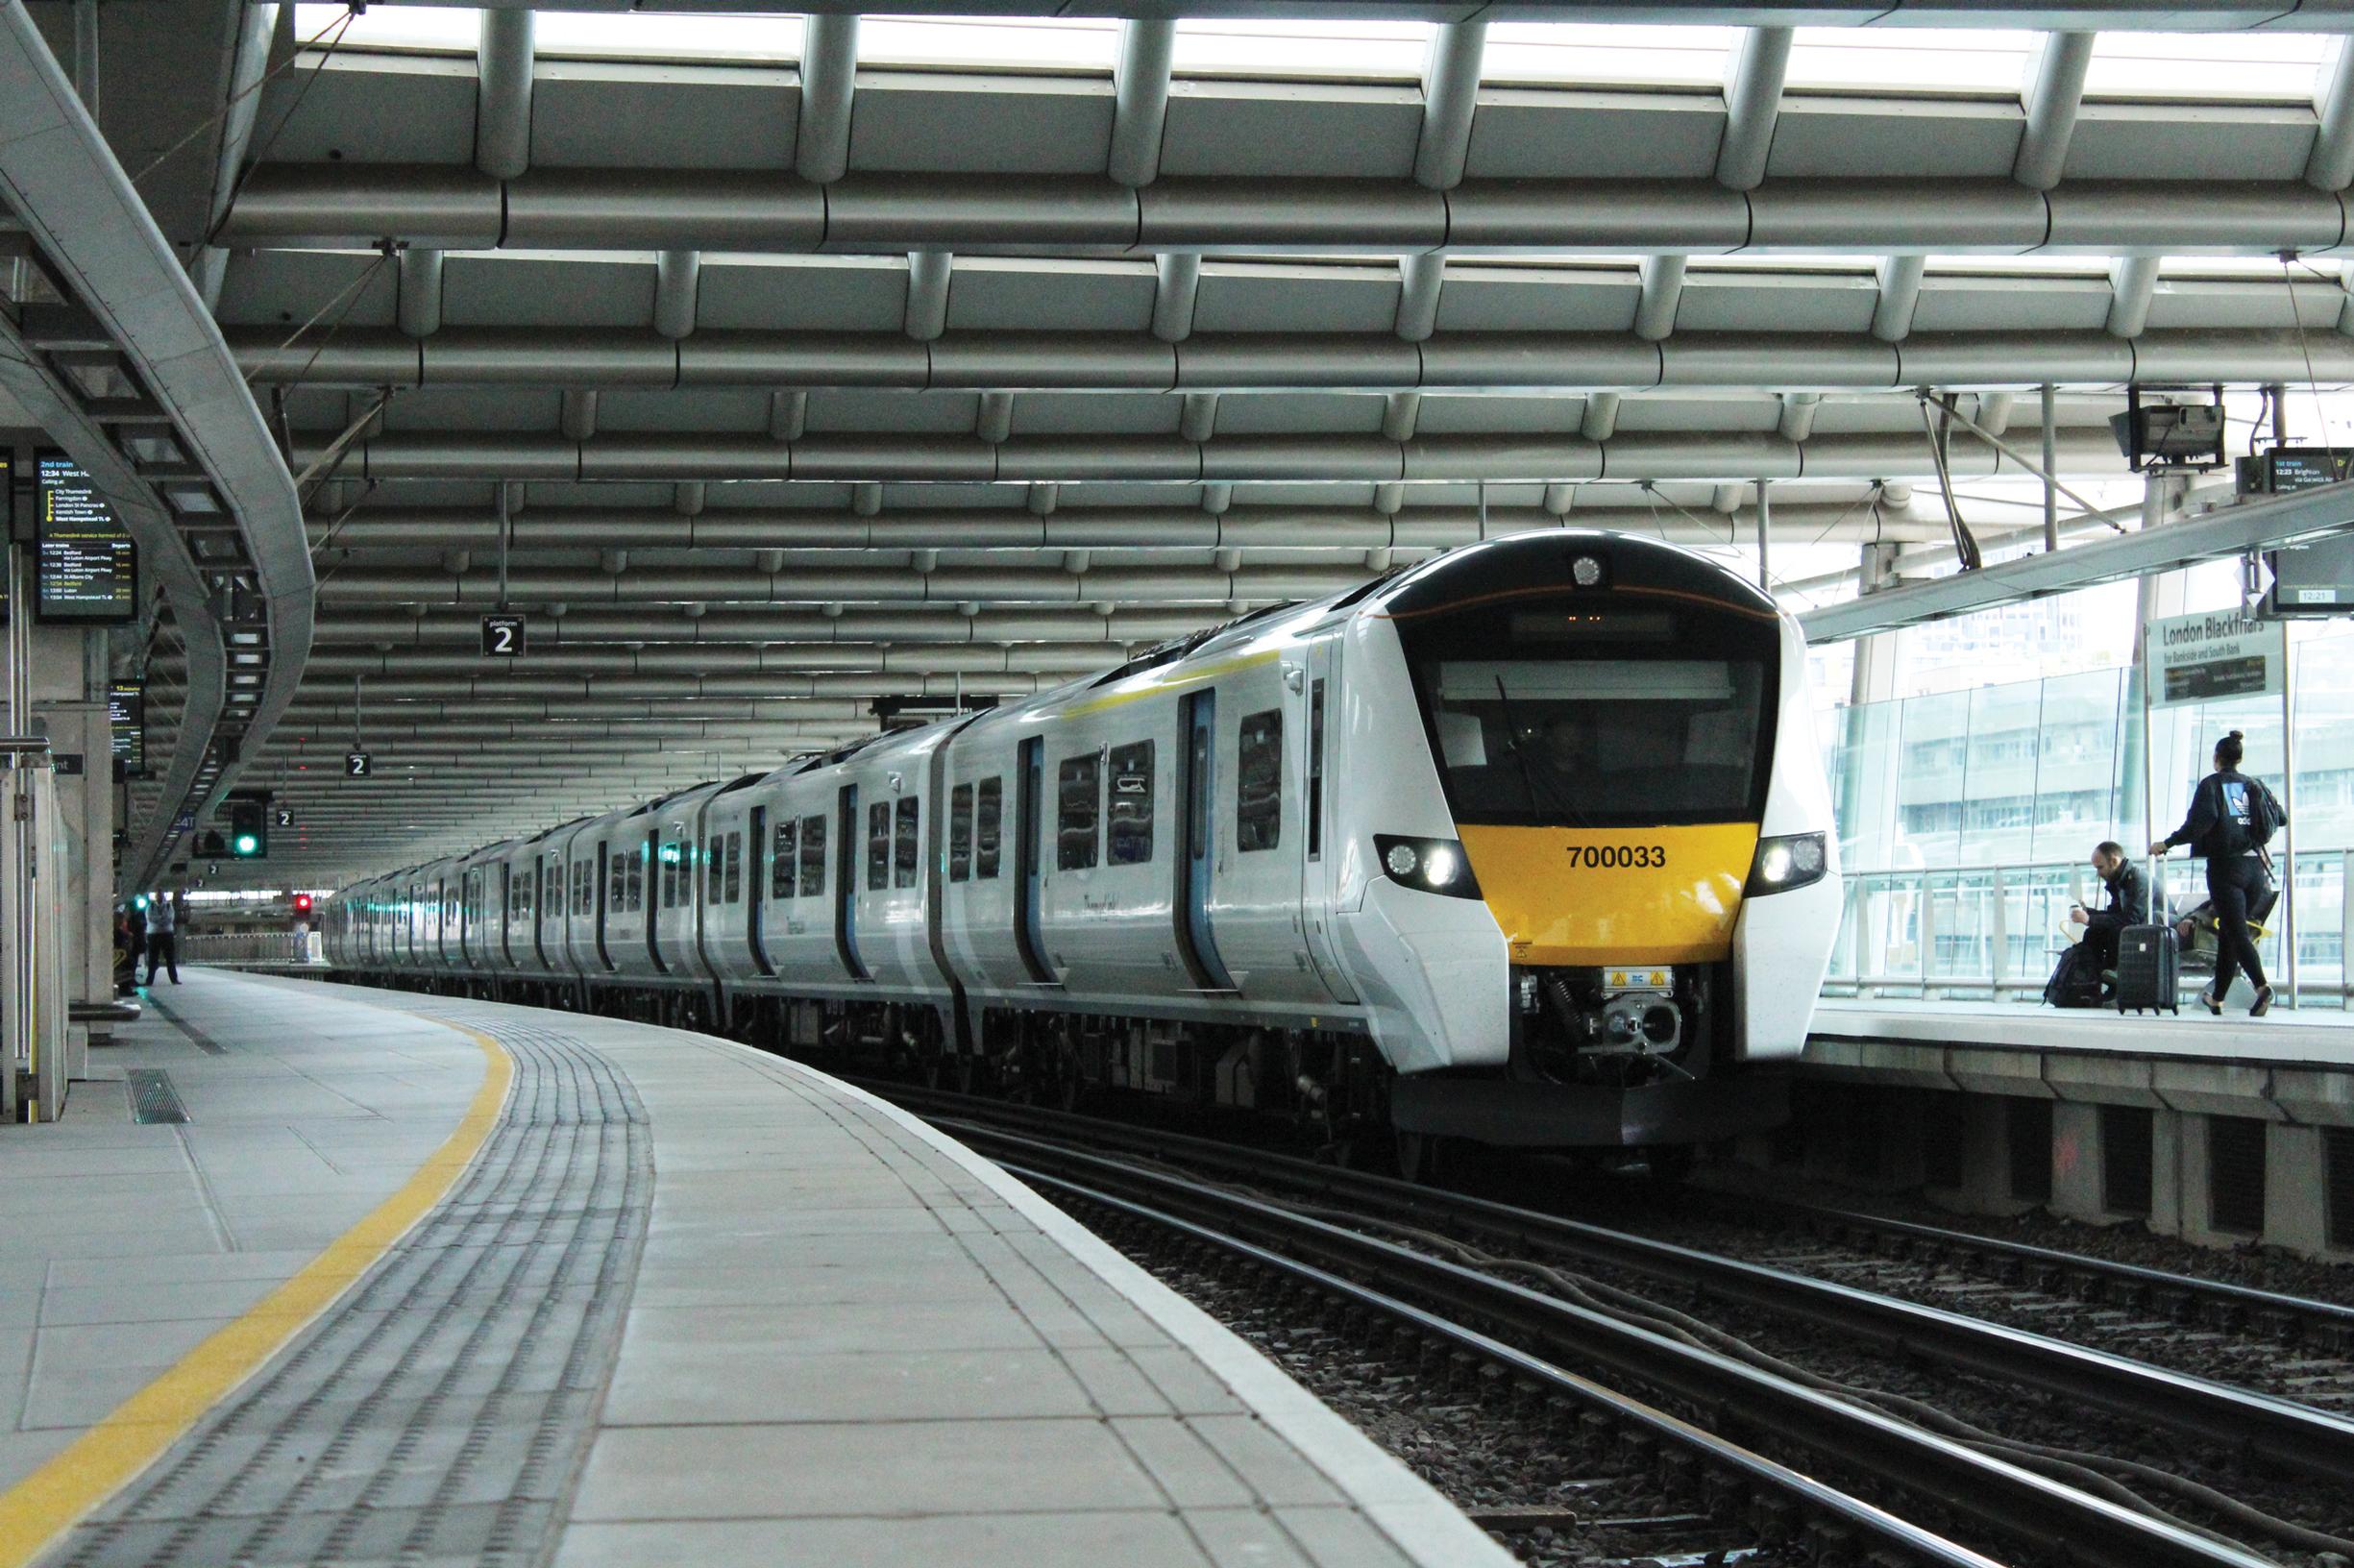 The Thameslink enhancement is nearing completion